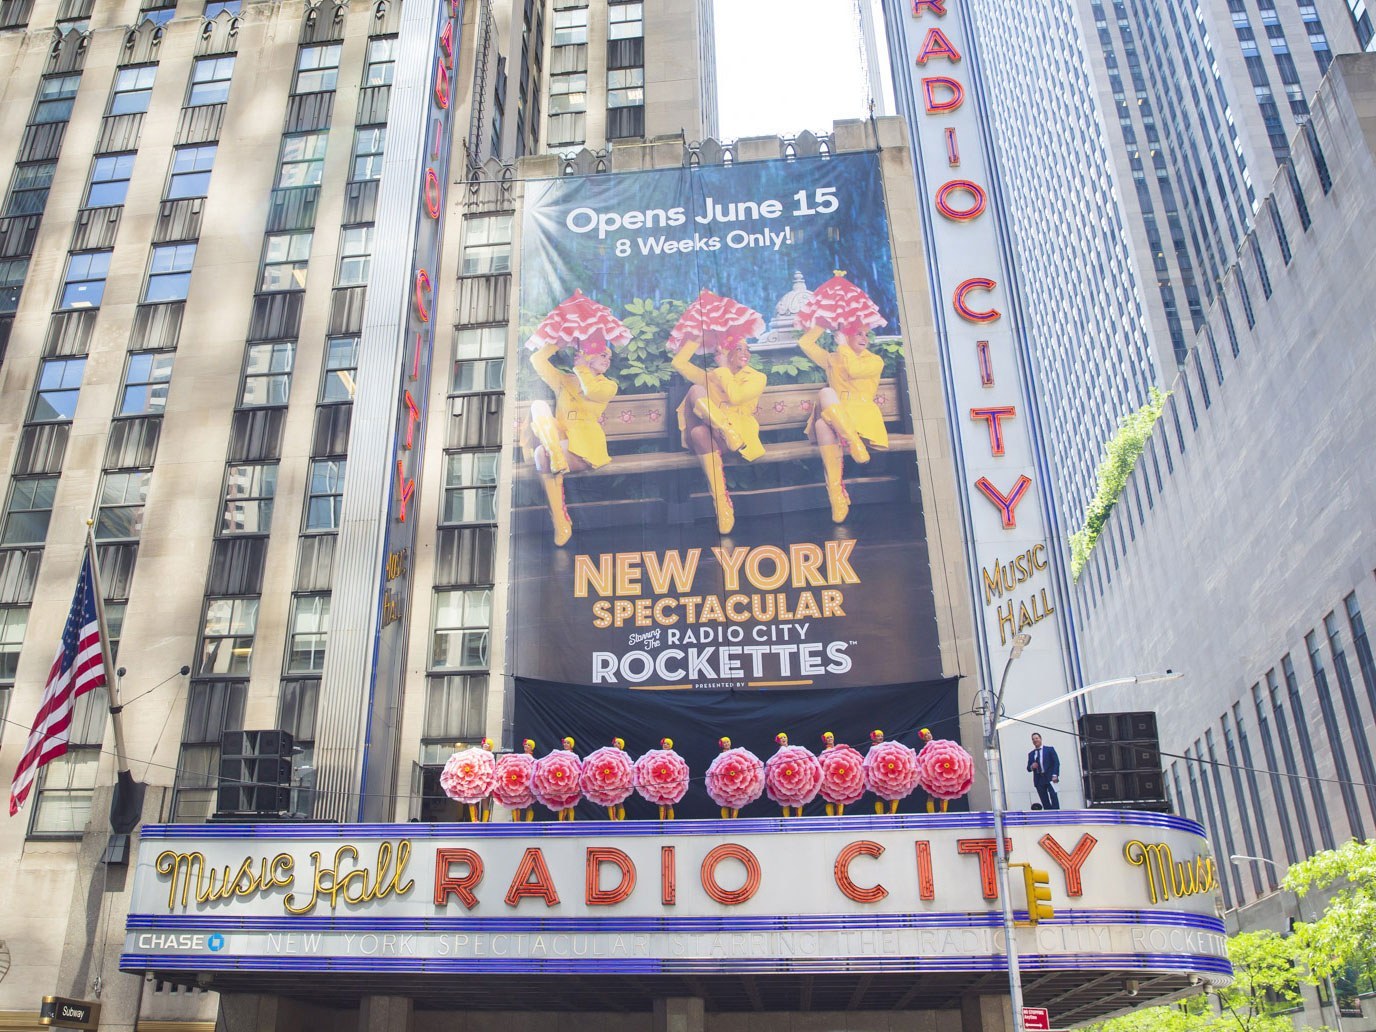 Rockettes stand atop the Radio City Music Hall marquee